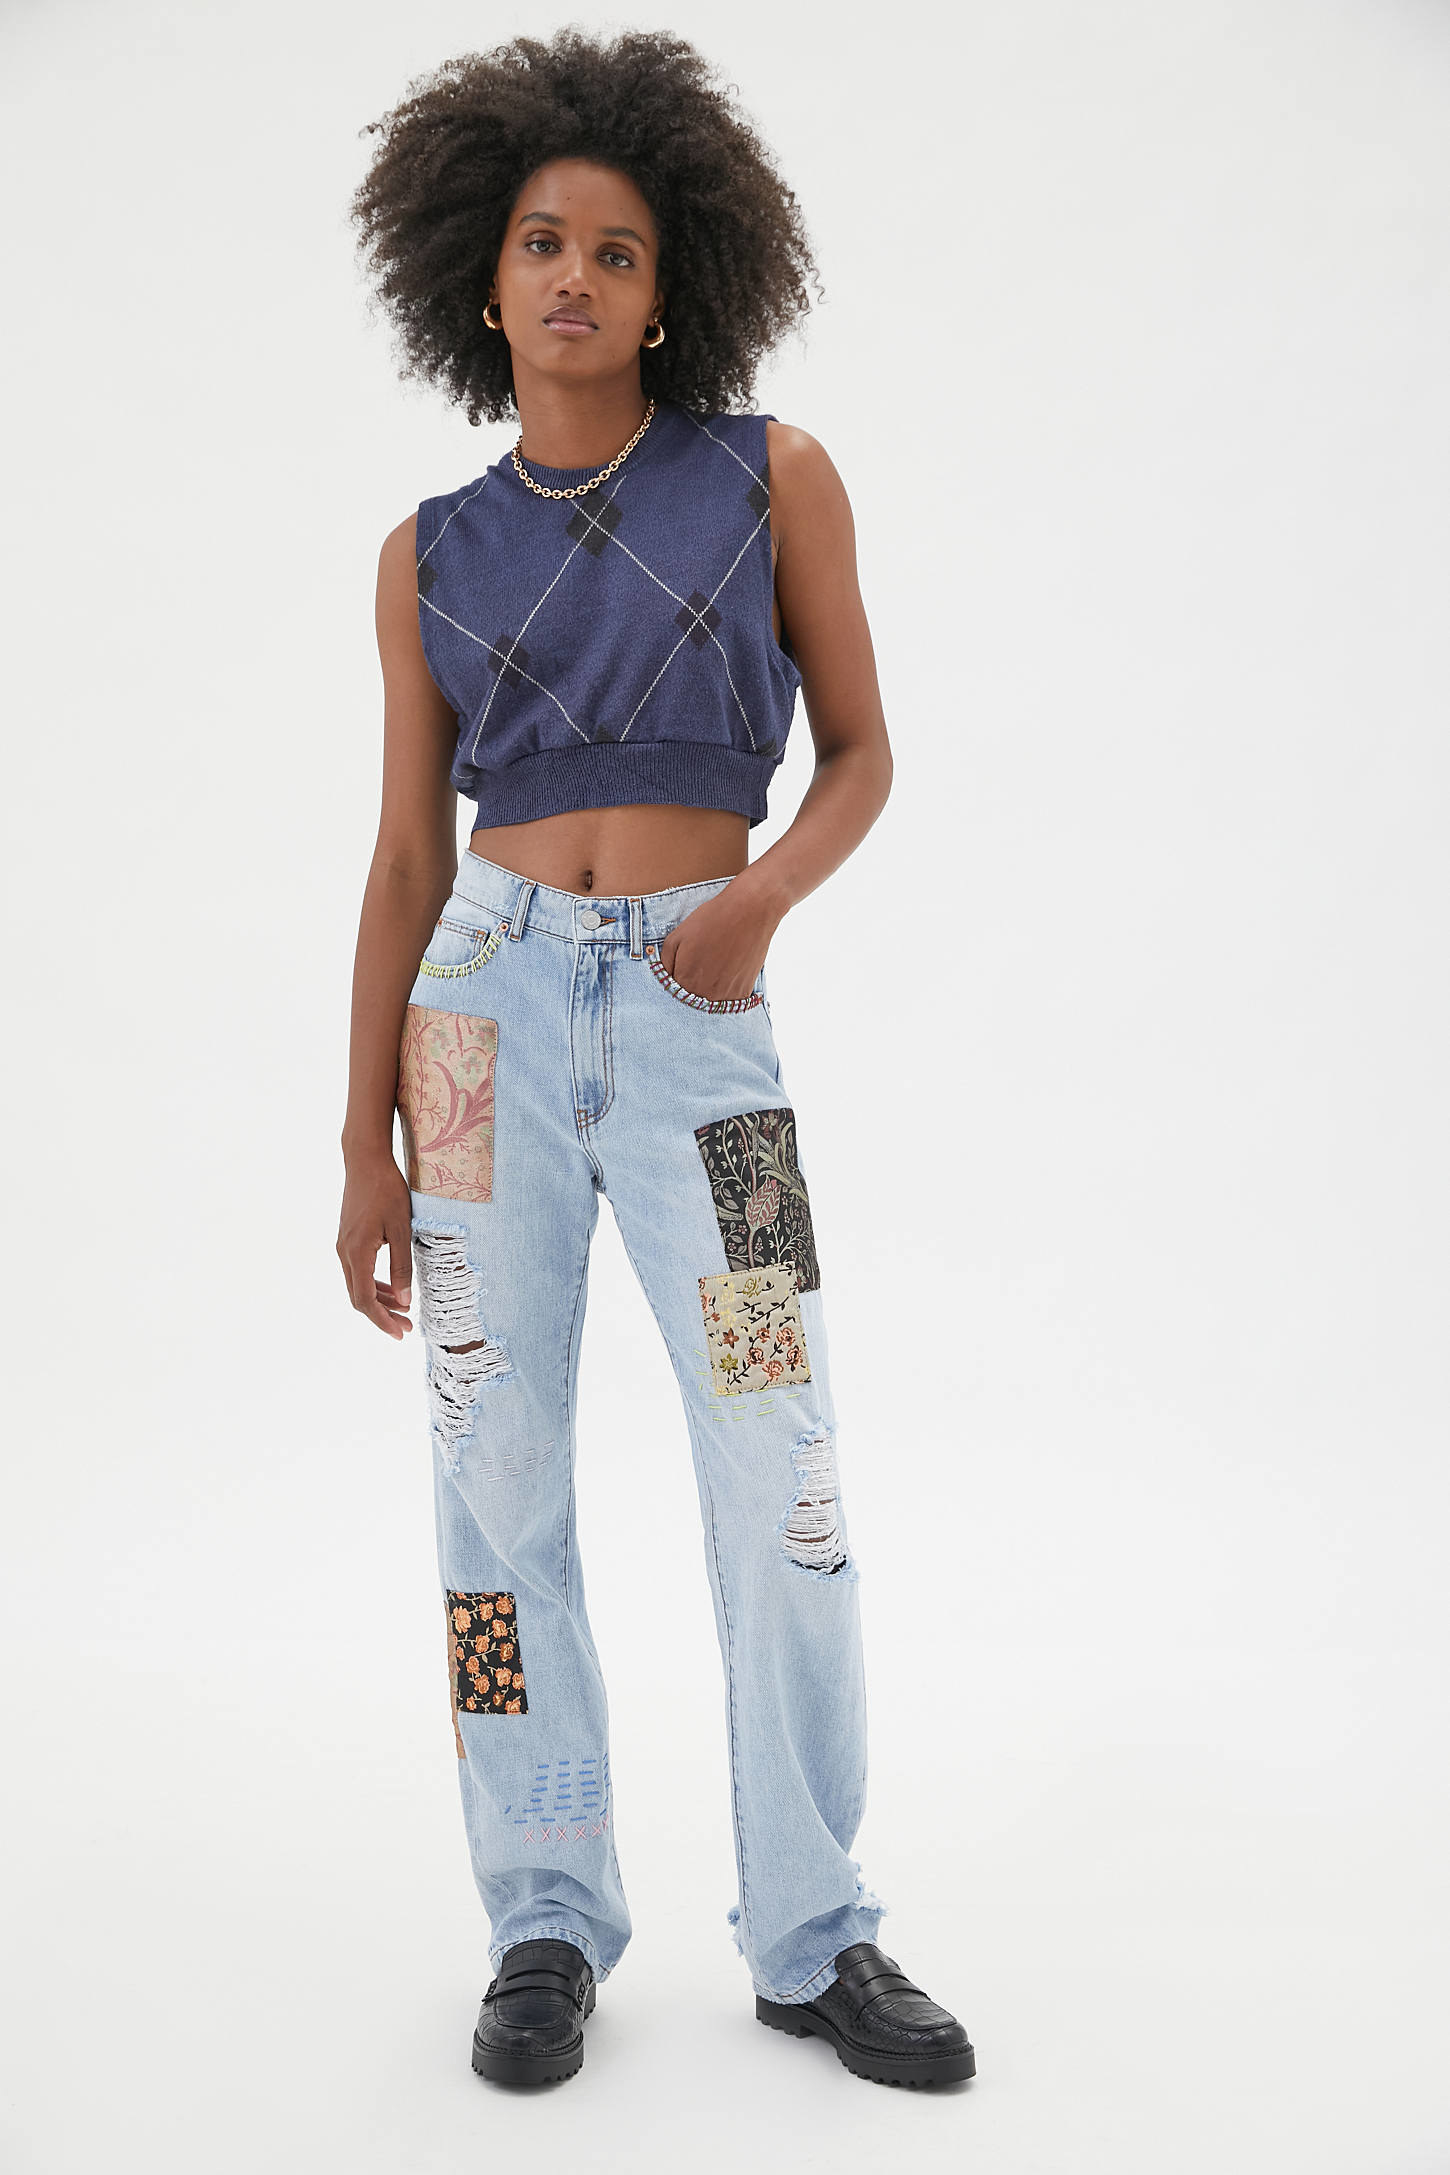 A model wearing the jeans with printed patches and rips